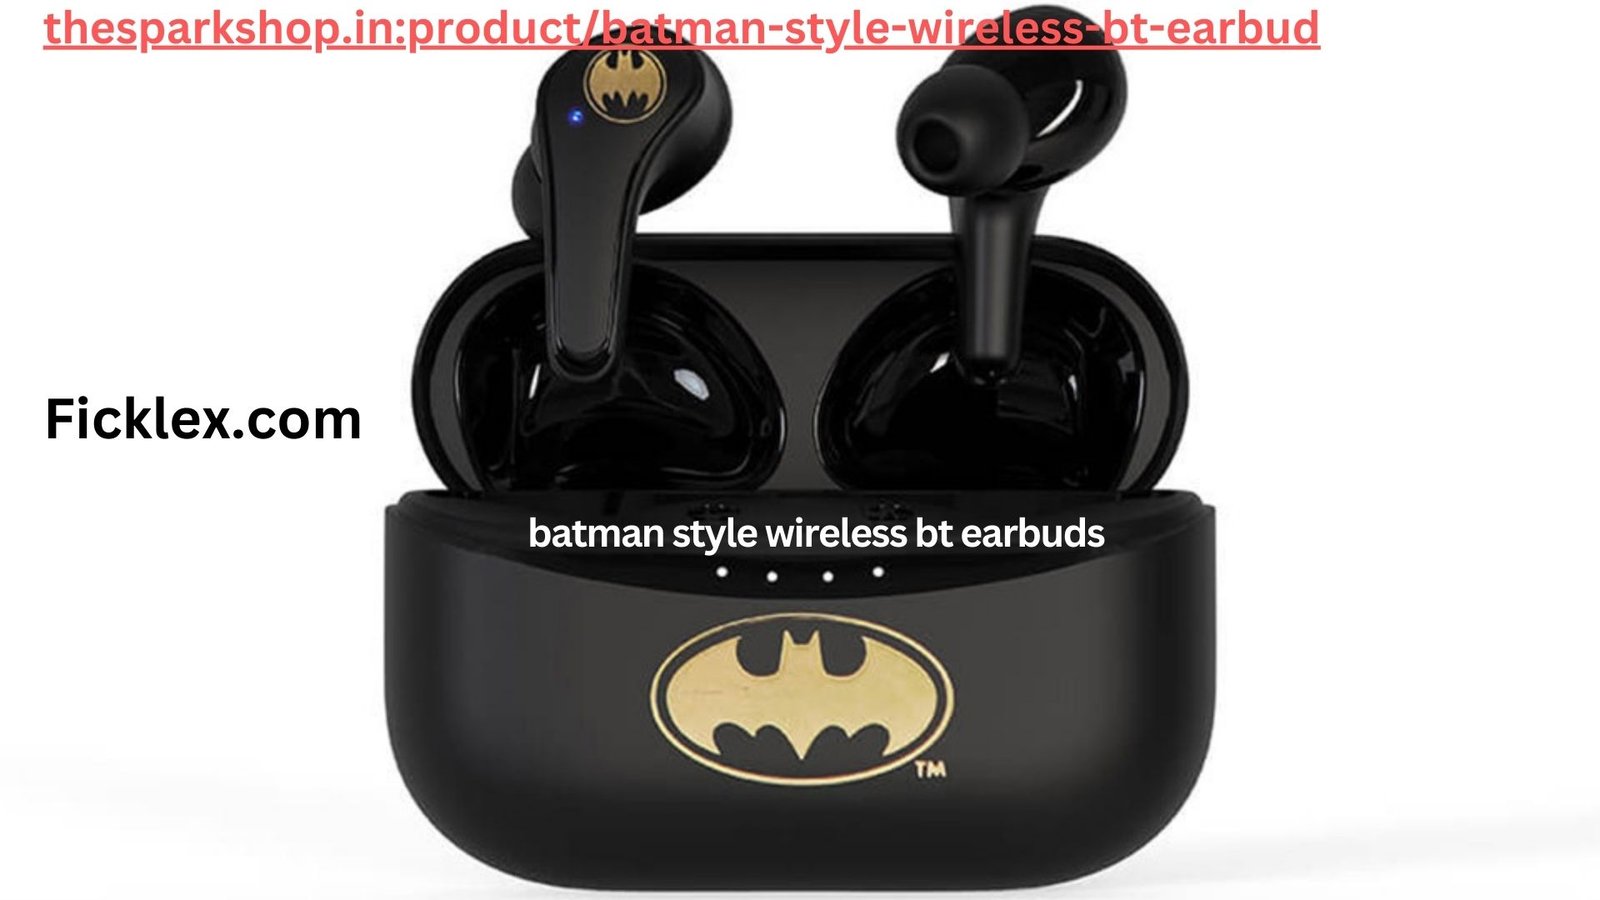 thesparkshop.in:product/batman-style-wireless-bt-earbud